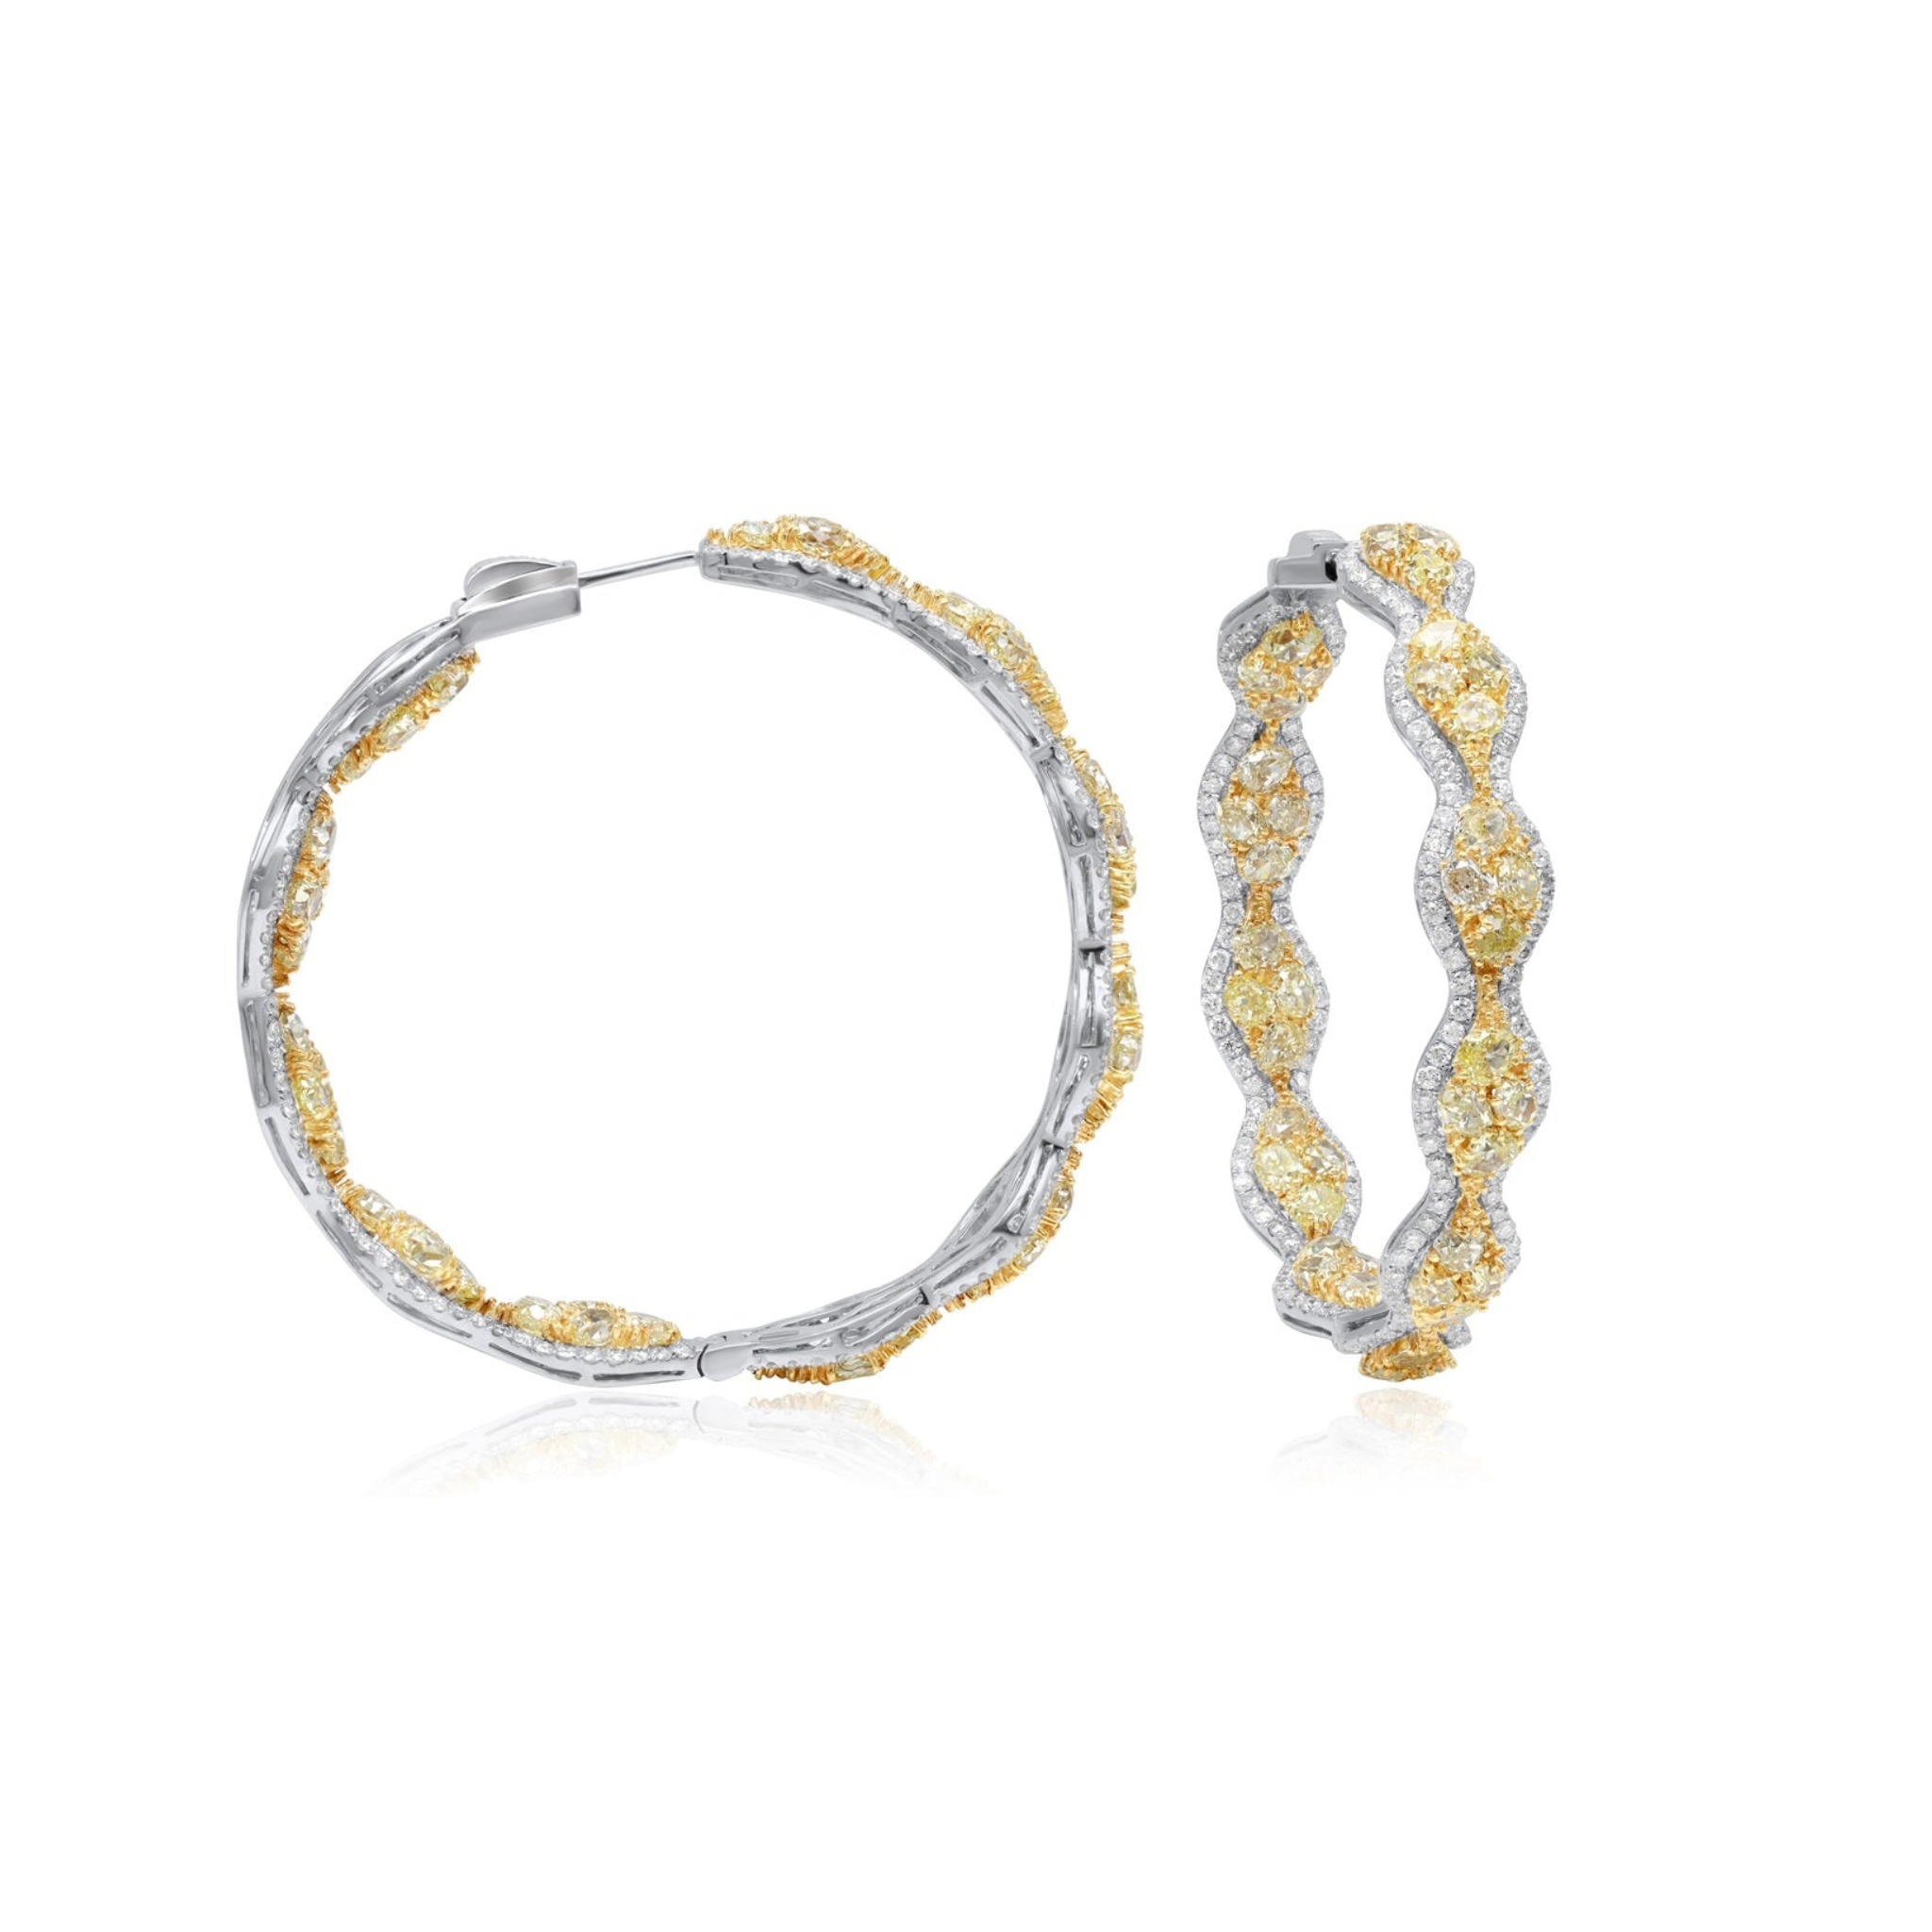 18 Kt White and Yellow Gold Hoop Earrings with Yellow Diamonds Totaling 13.00 cts.jpg